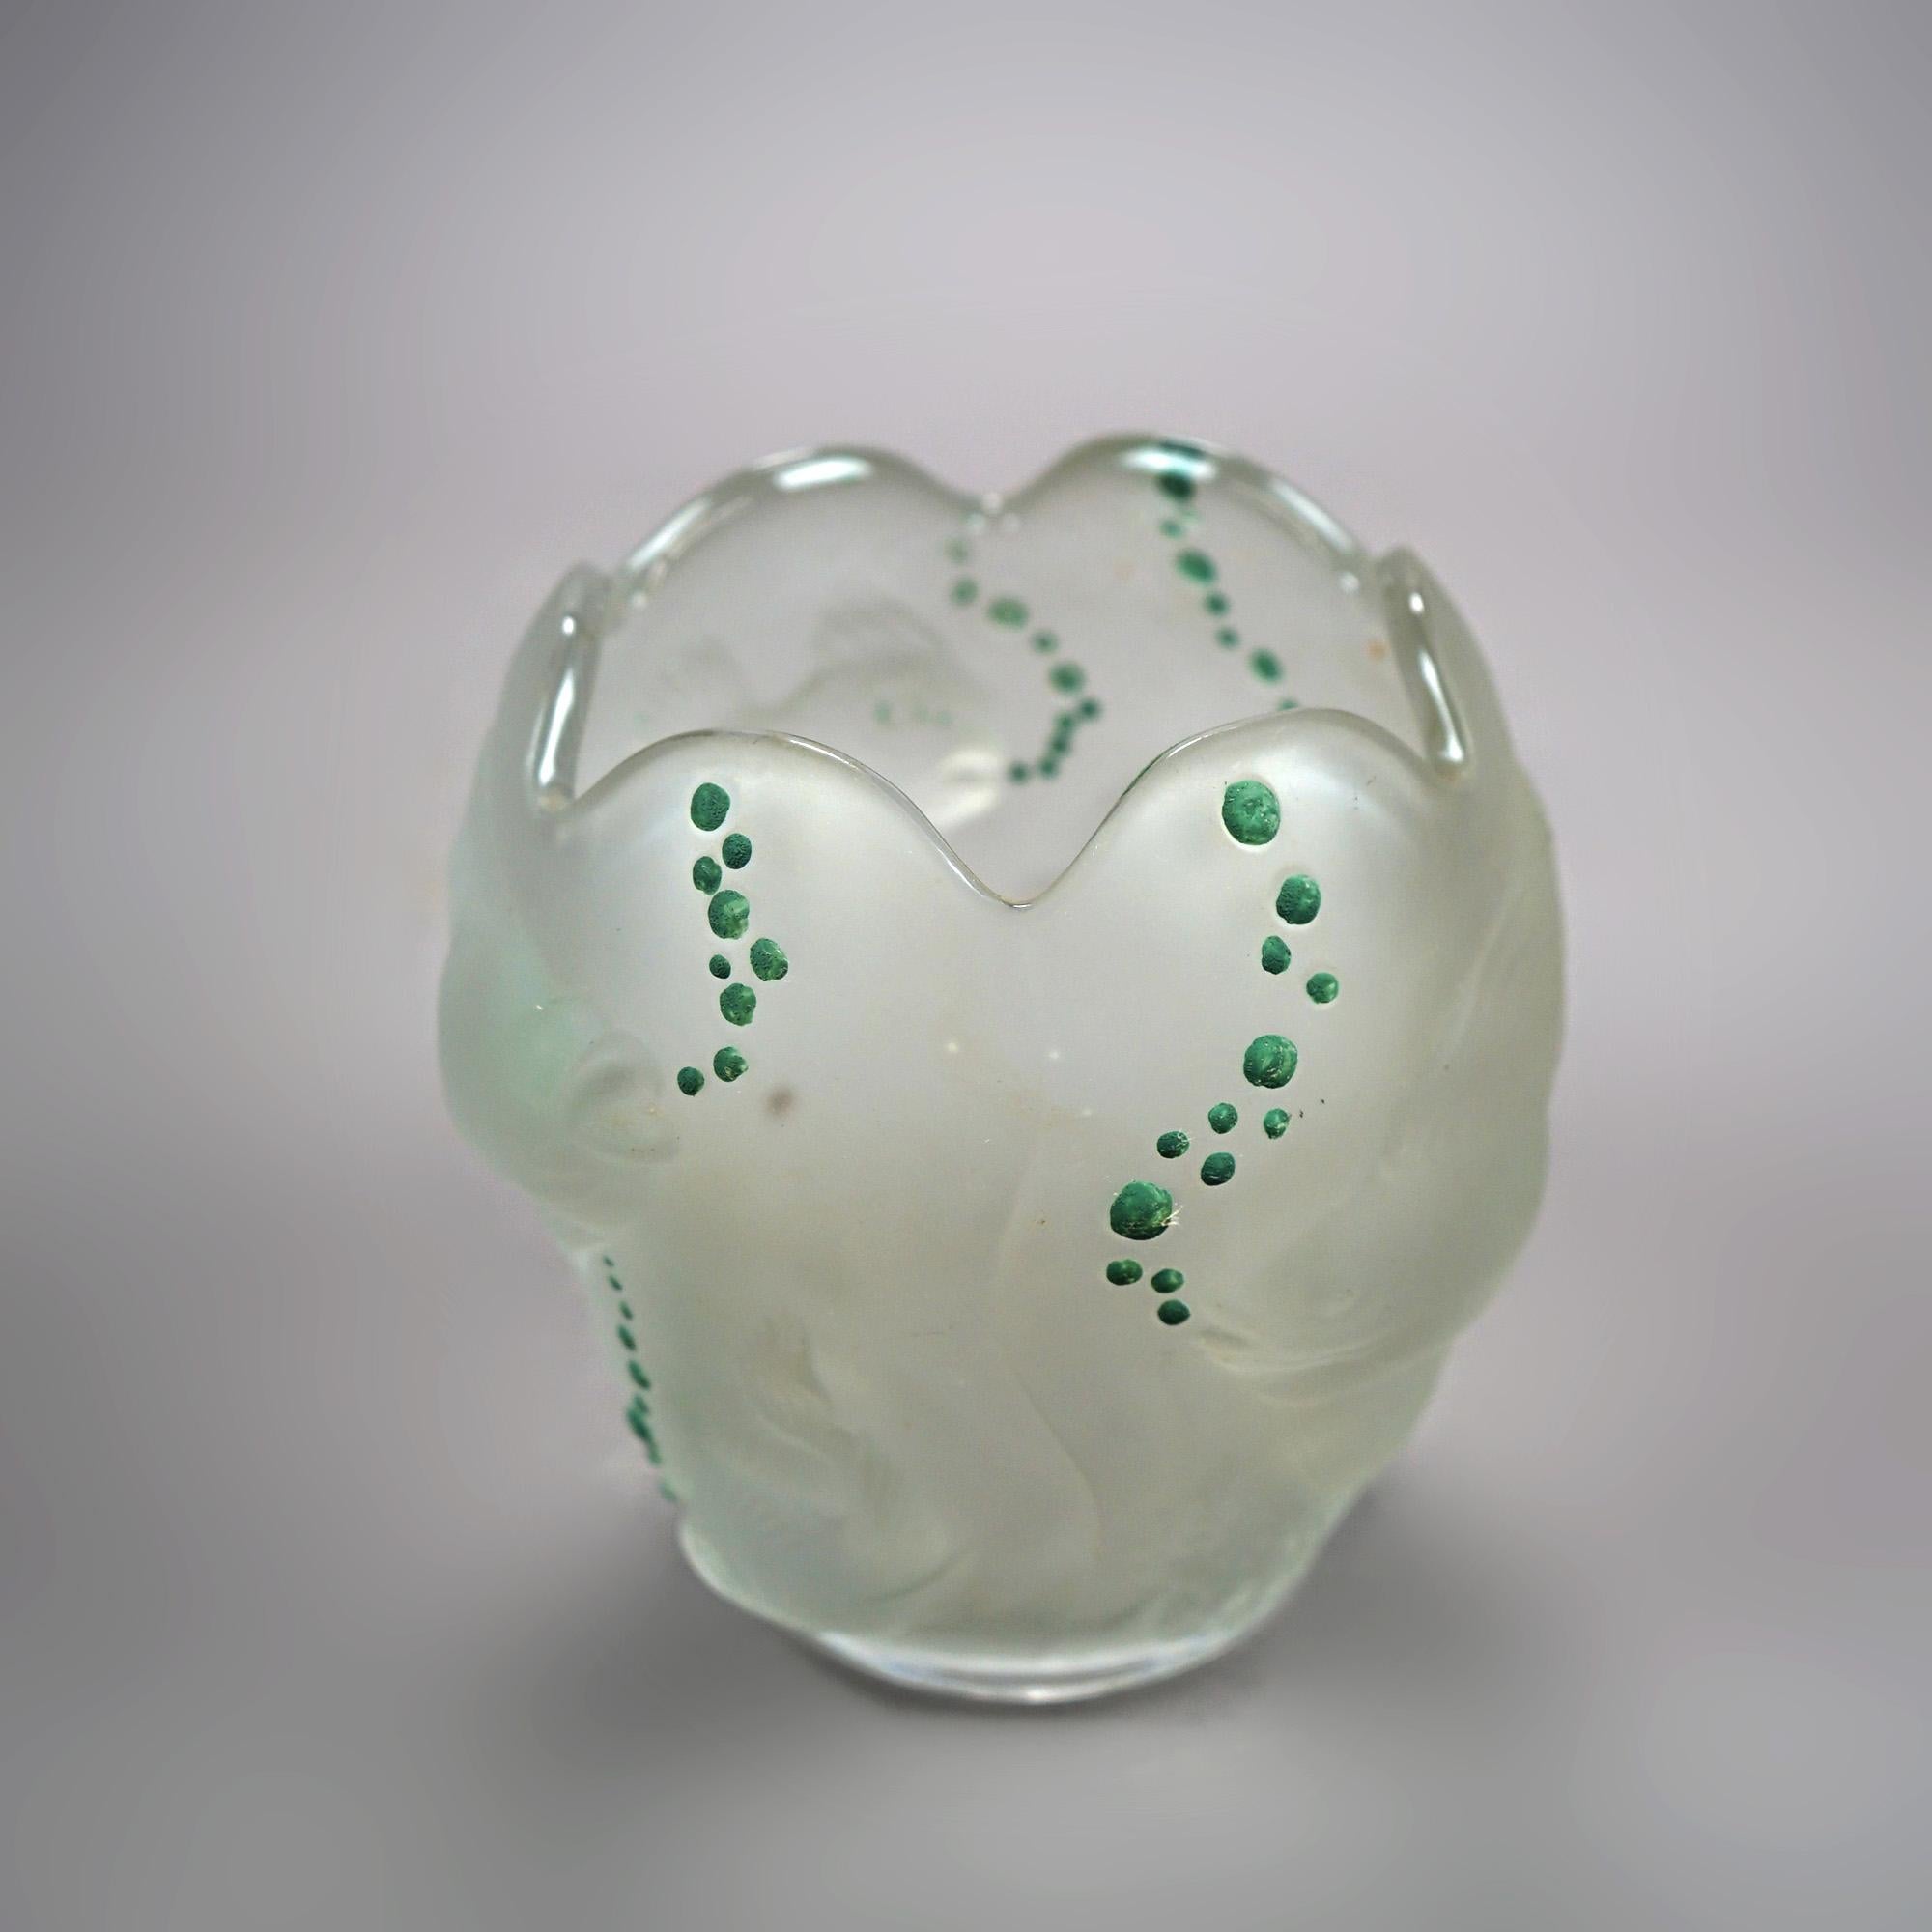 A figural vase in the manner of Lalique offers in relief underwater scene with fish and applied enamel bubbles, unsigned, 20th century.

Measures- 6.25''H x 6.25''W x 6.25''D.

Catalogue Note: Ask about DISCOUNTED DELIVERY RATES available to most